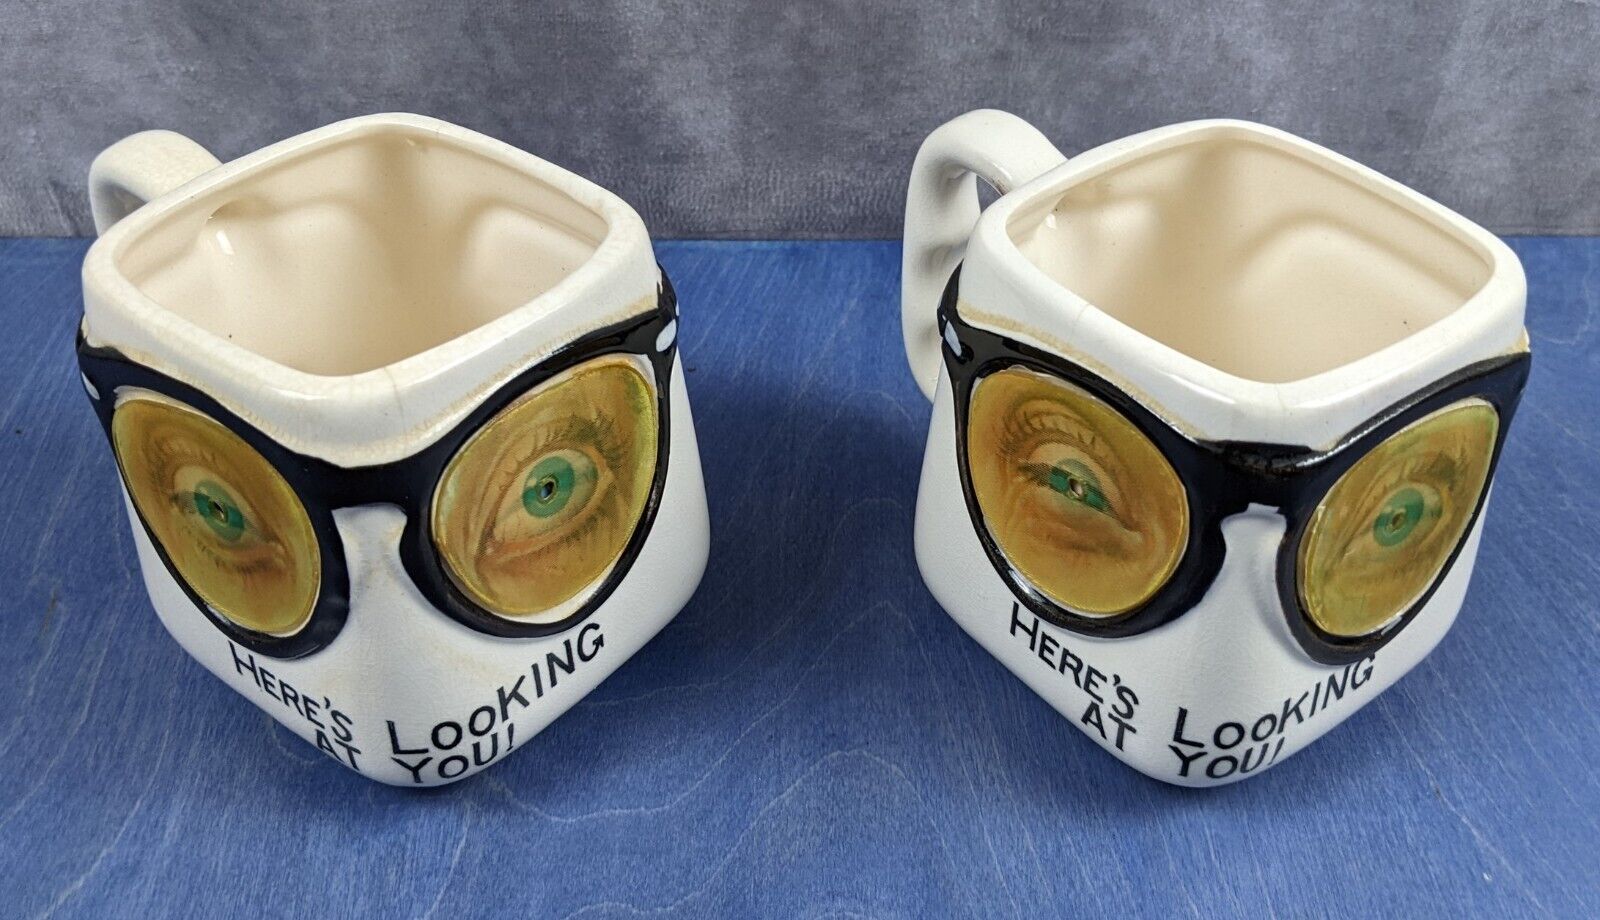 Lot of 2 Vintage 1959 Parksmith Corp - Here's Looking At You Ceramic Coffee Mugs